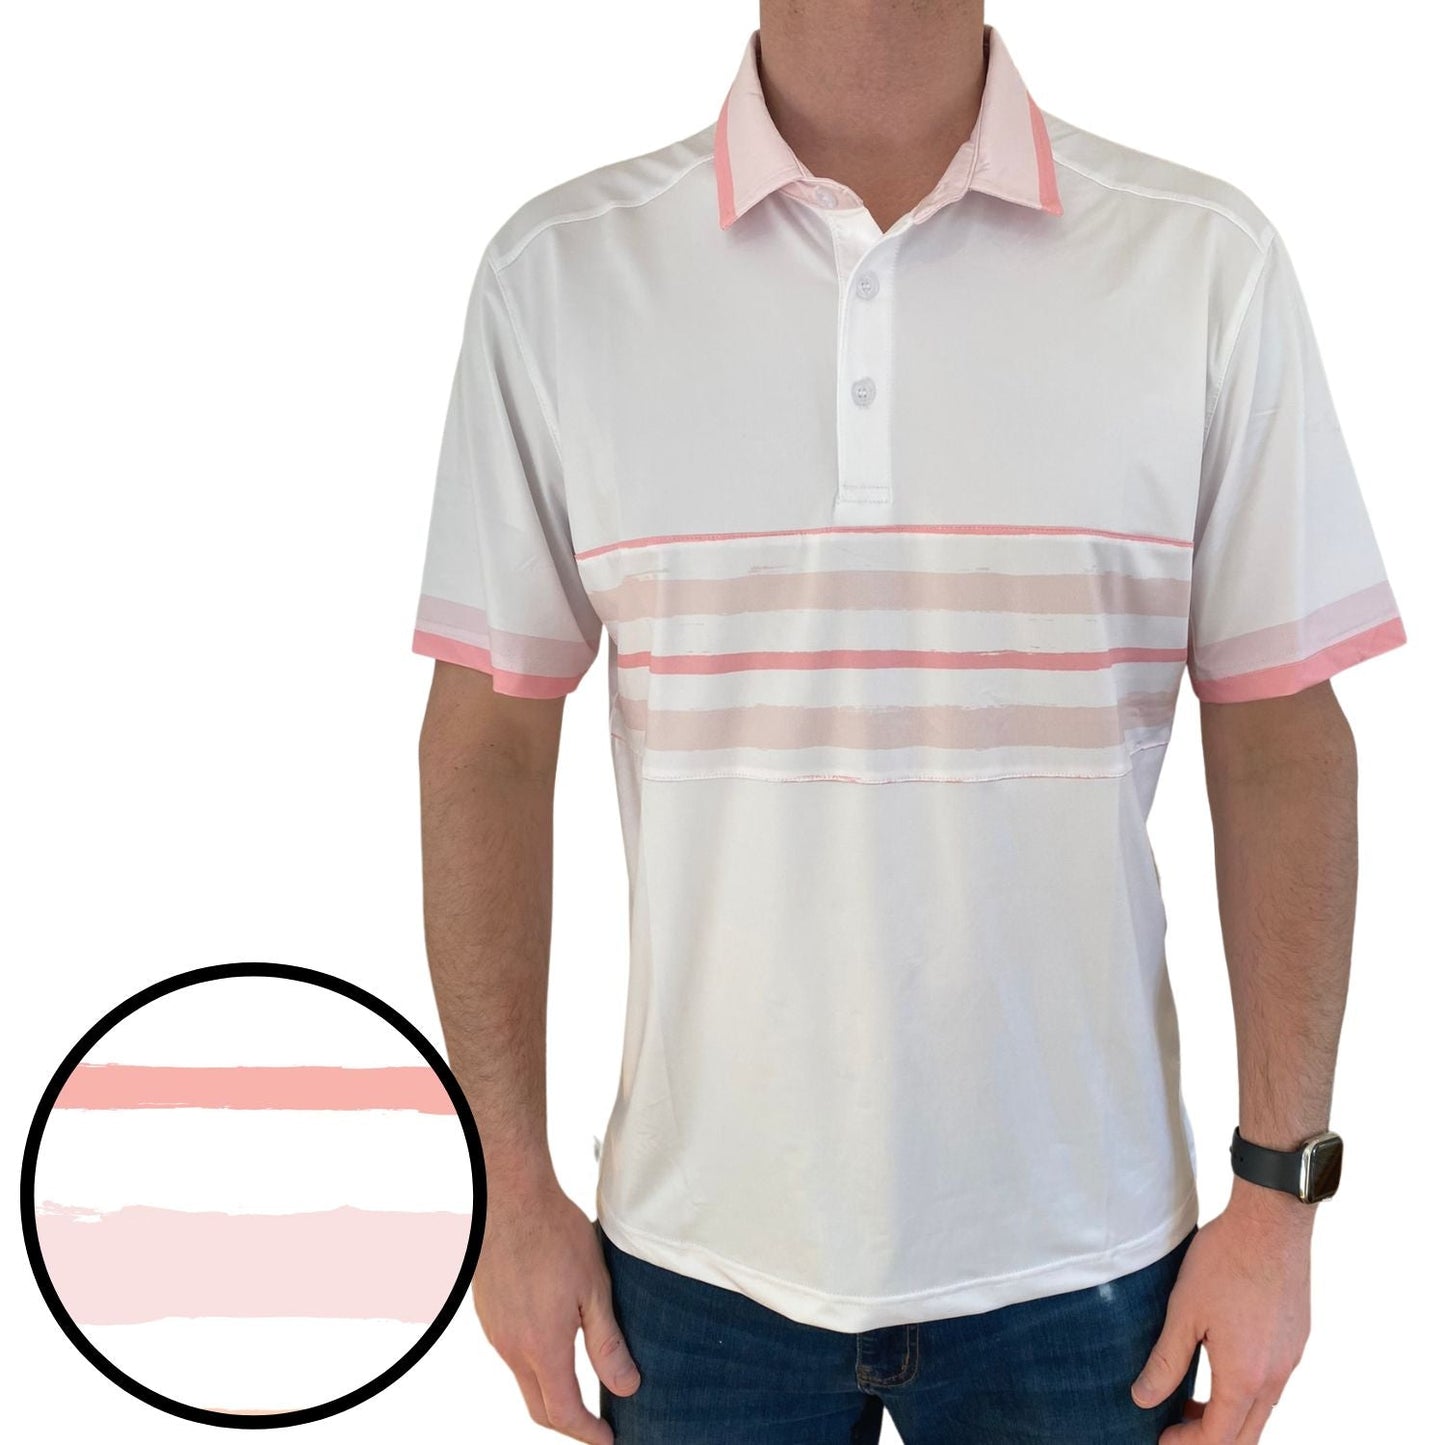 The Champions Everyday Polo by Tropical Bros